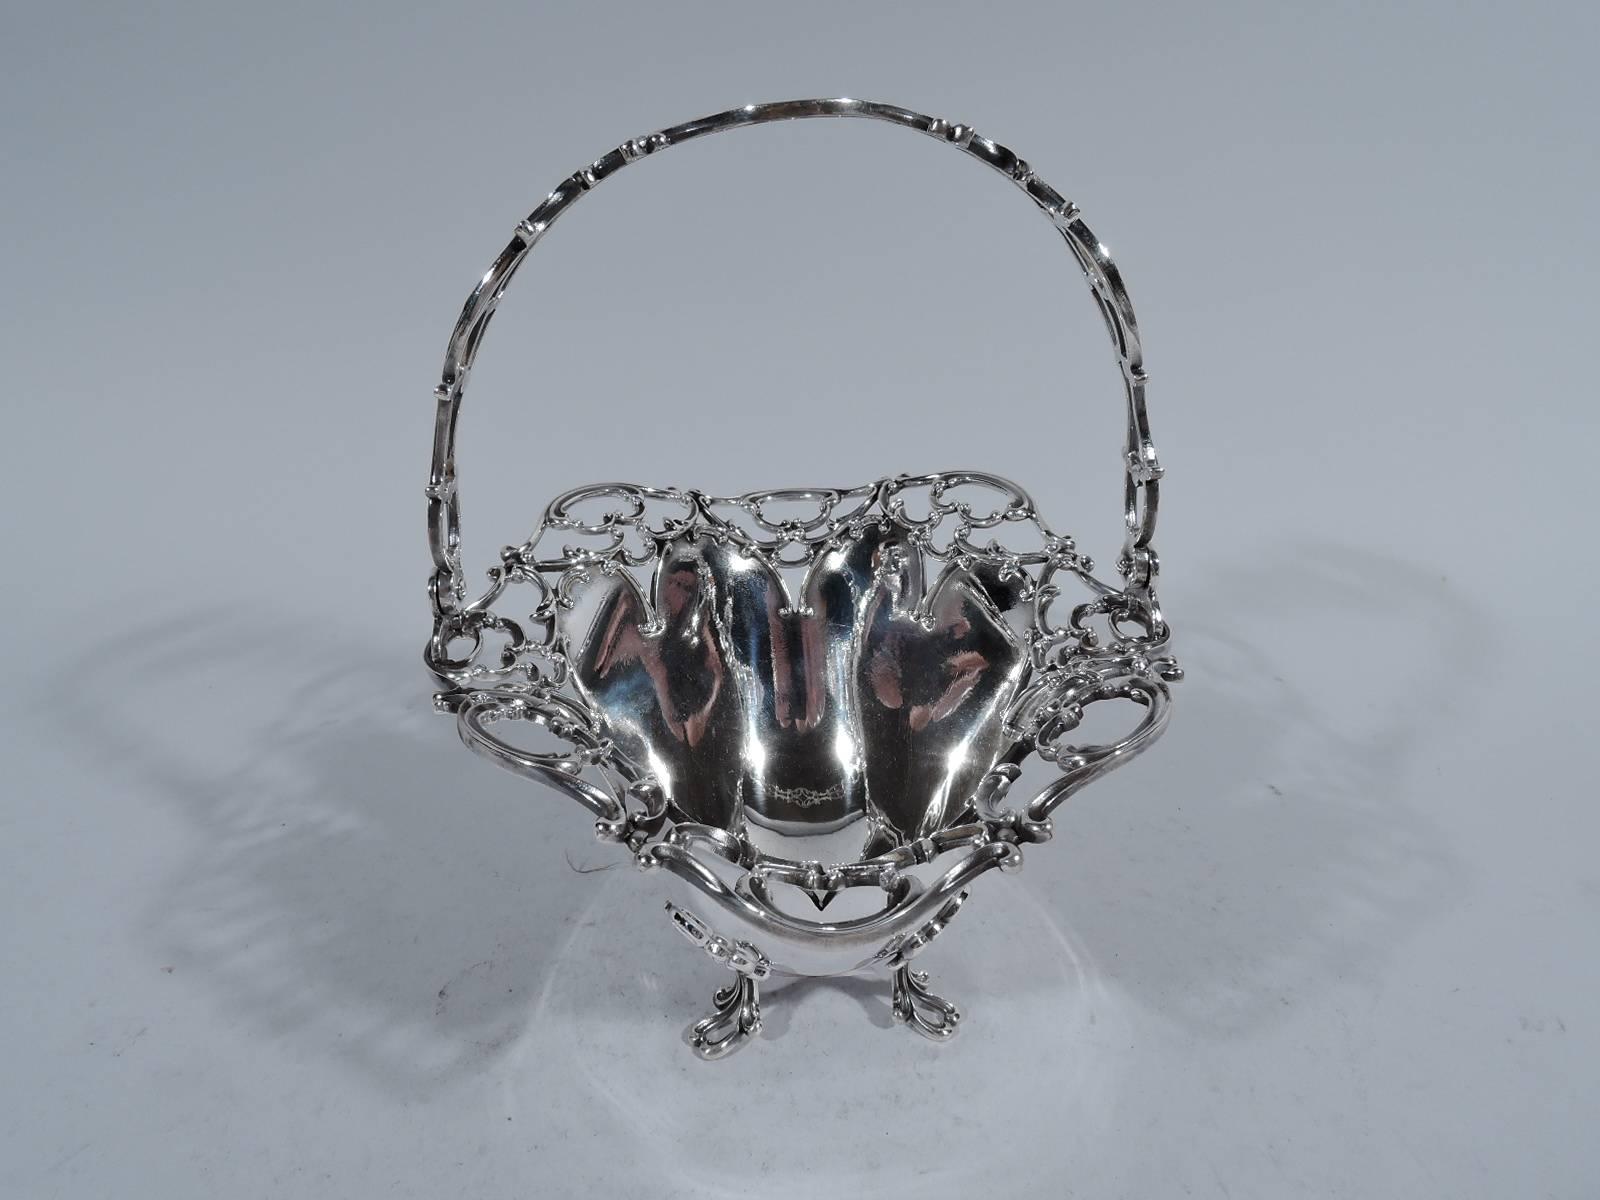 Edwardian sterling silver basket. Made by Towle in Newburyport, Mass., circa 1910. Deep and solid well with open scrollwork applied to scalloped rim. Open scrollwork swing handle and four supports same. Hallmark includes no. 8273.

Dimensions: H